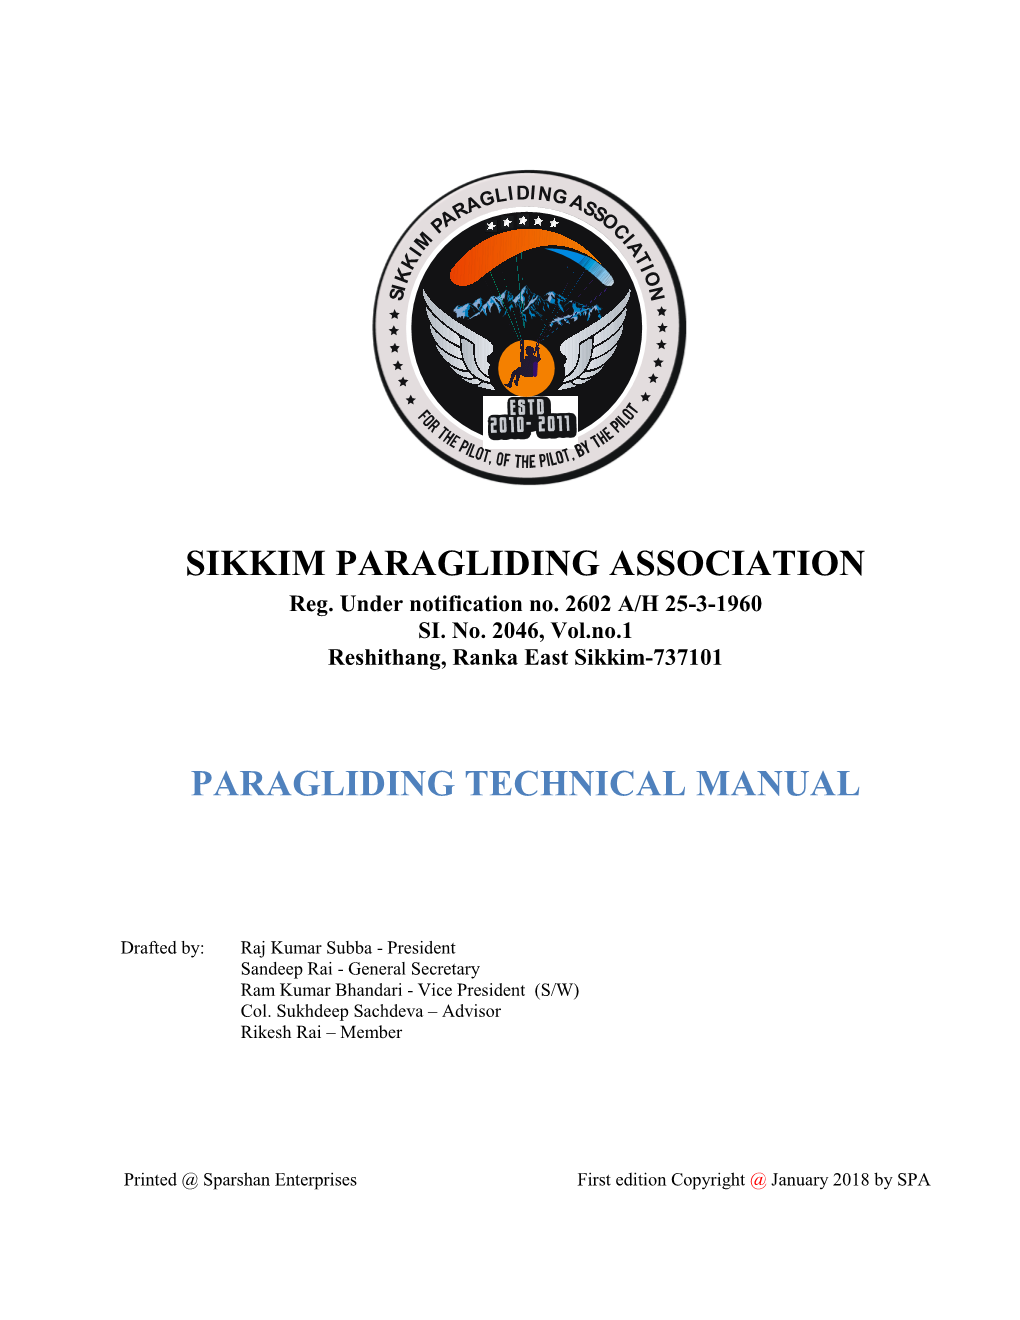 Paragliding Technical Manual